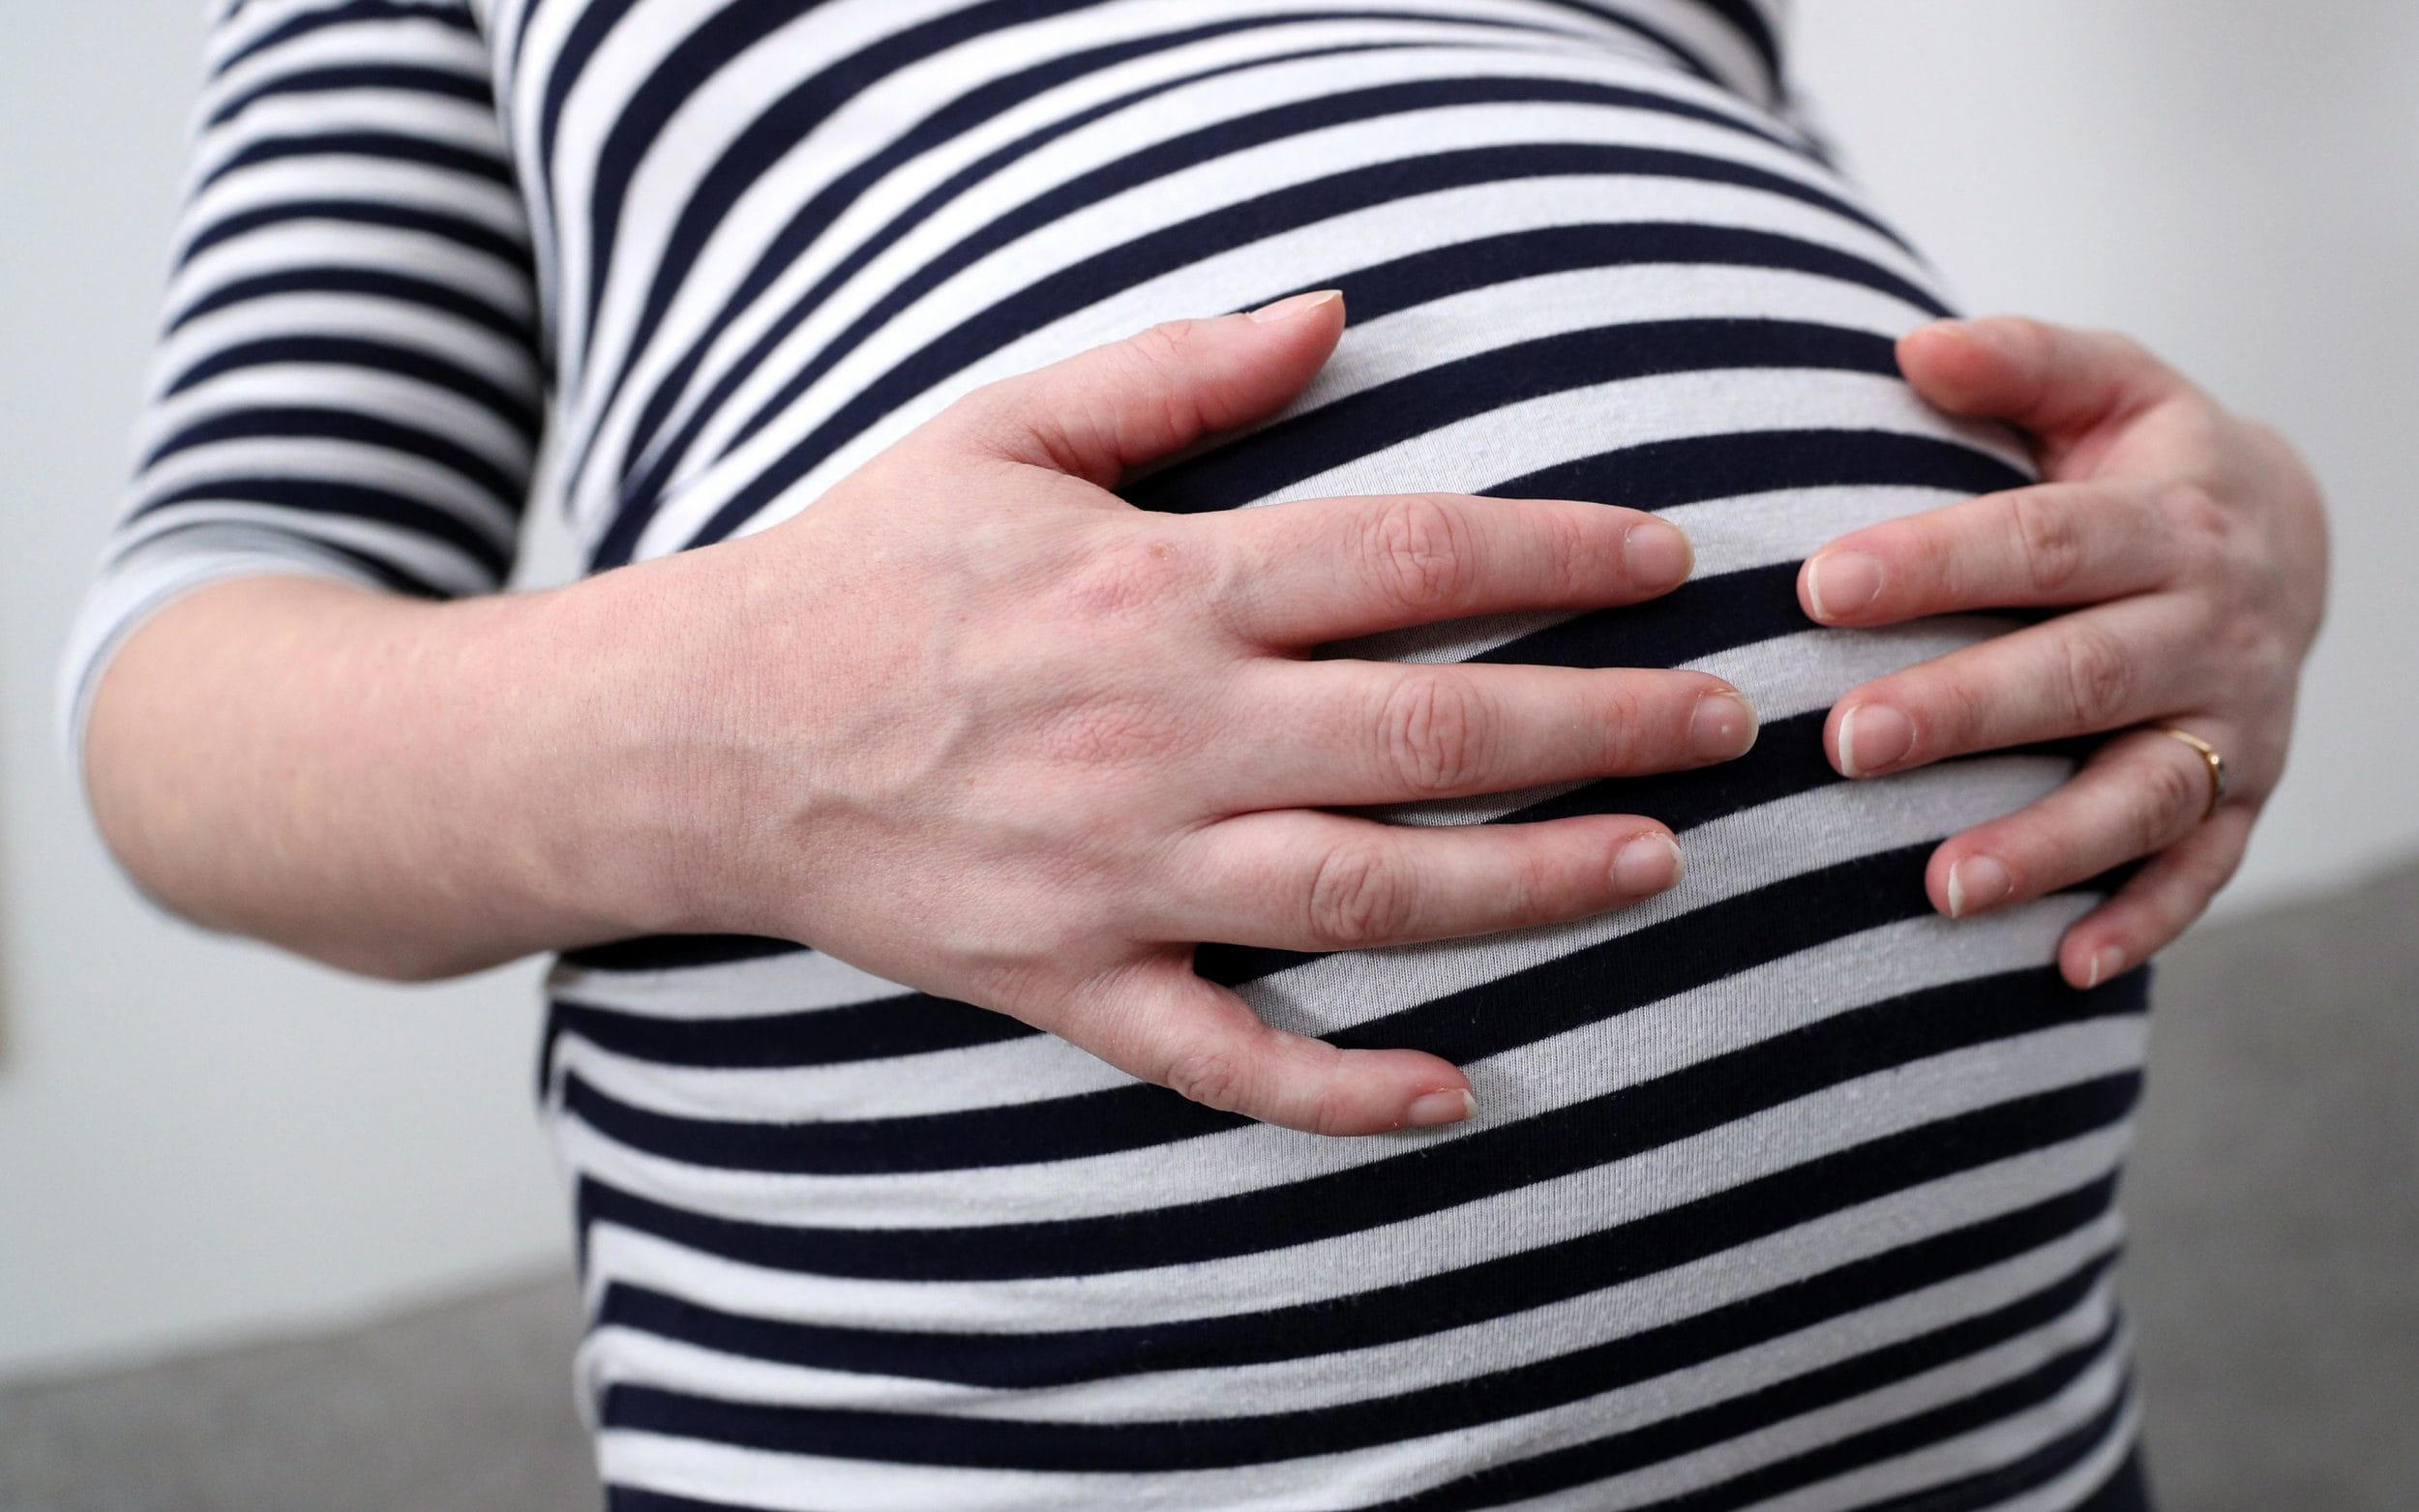 Commercial surrogacy exposes the hypocrisy of elite feminists